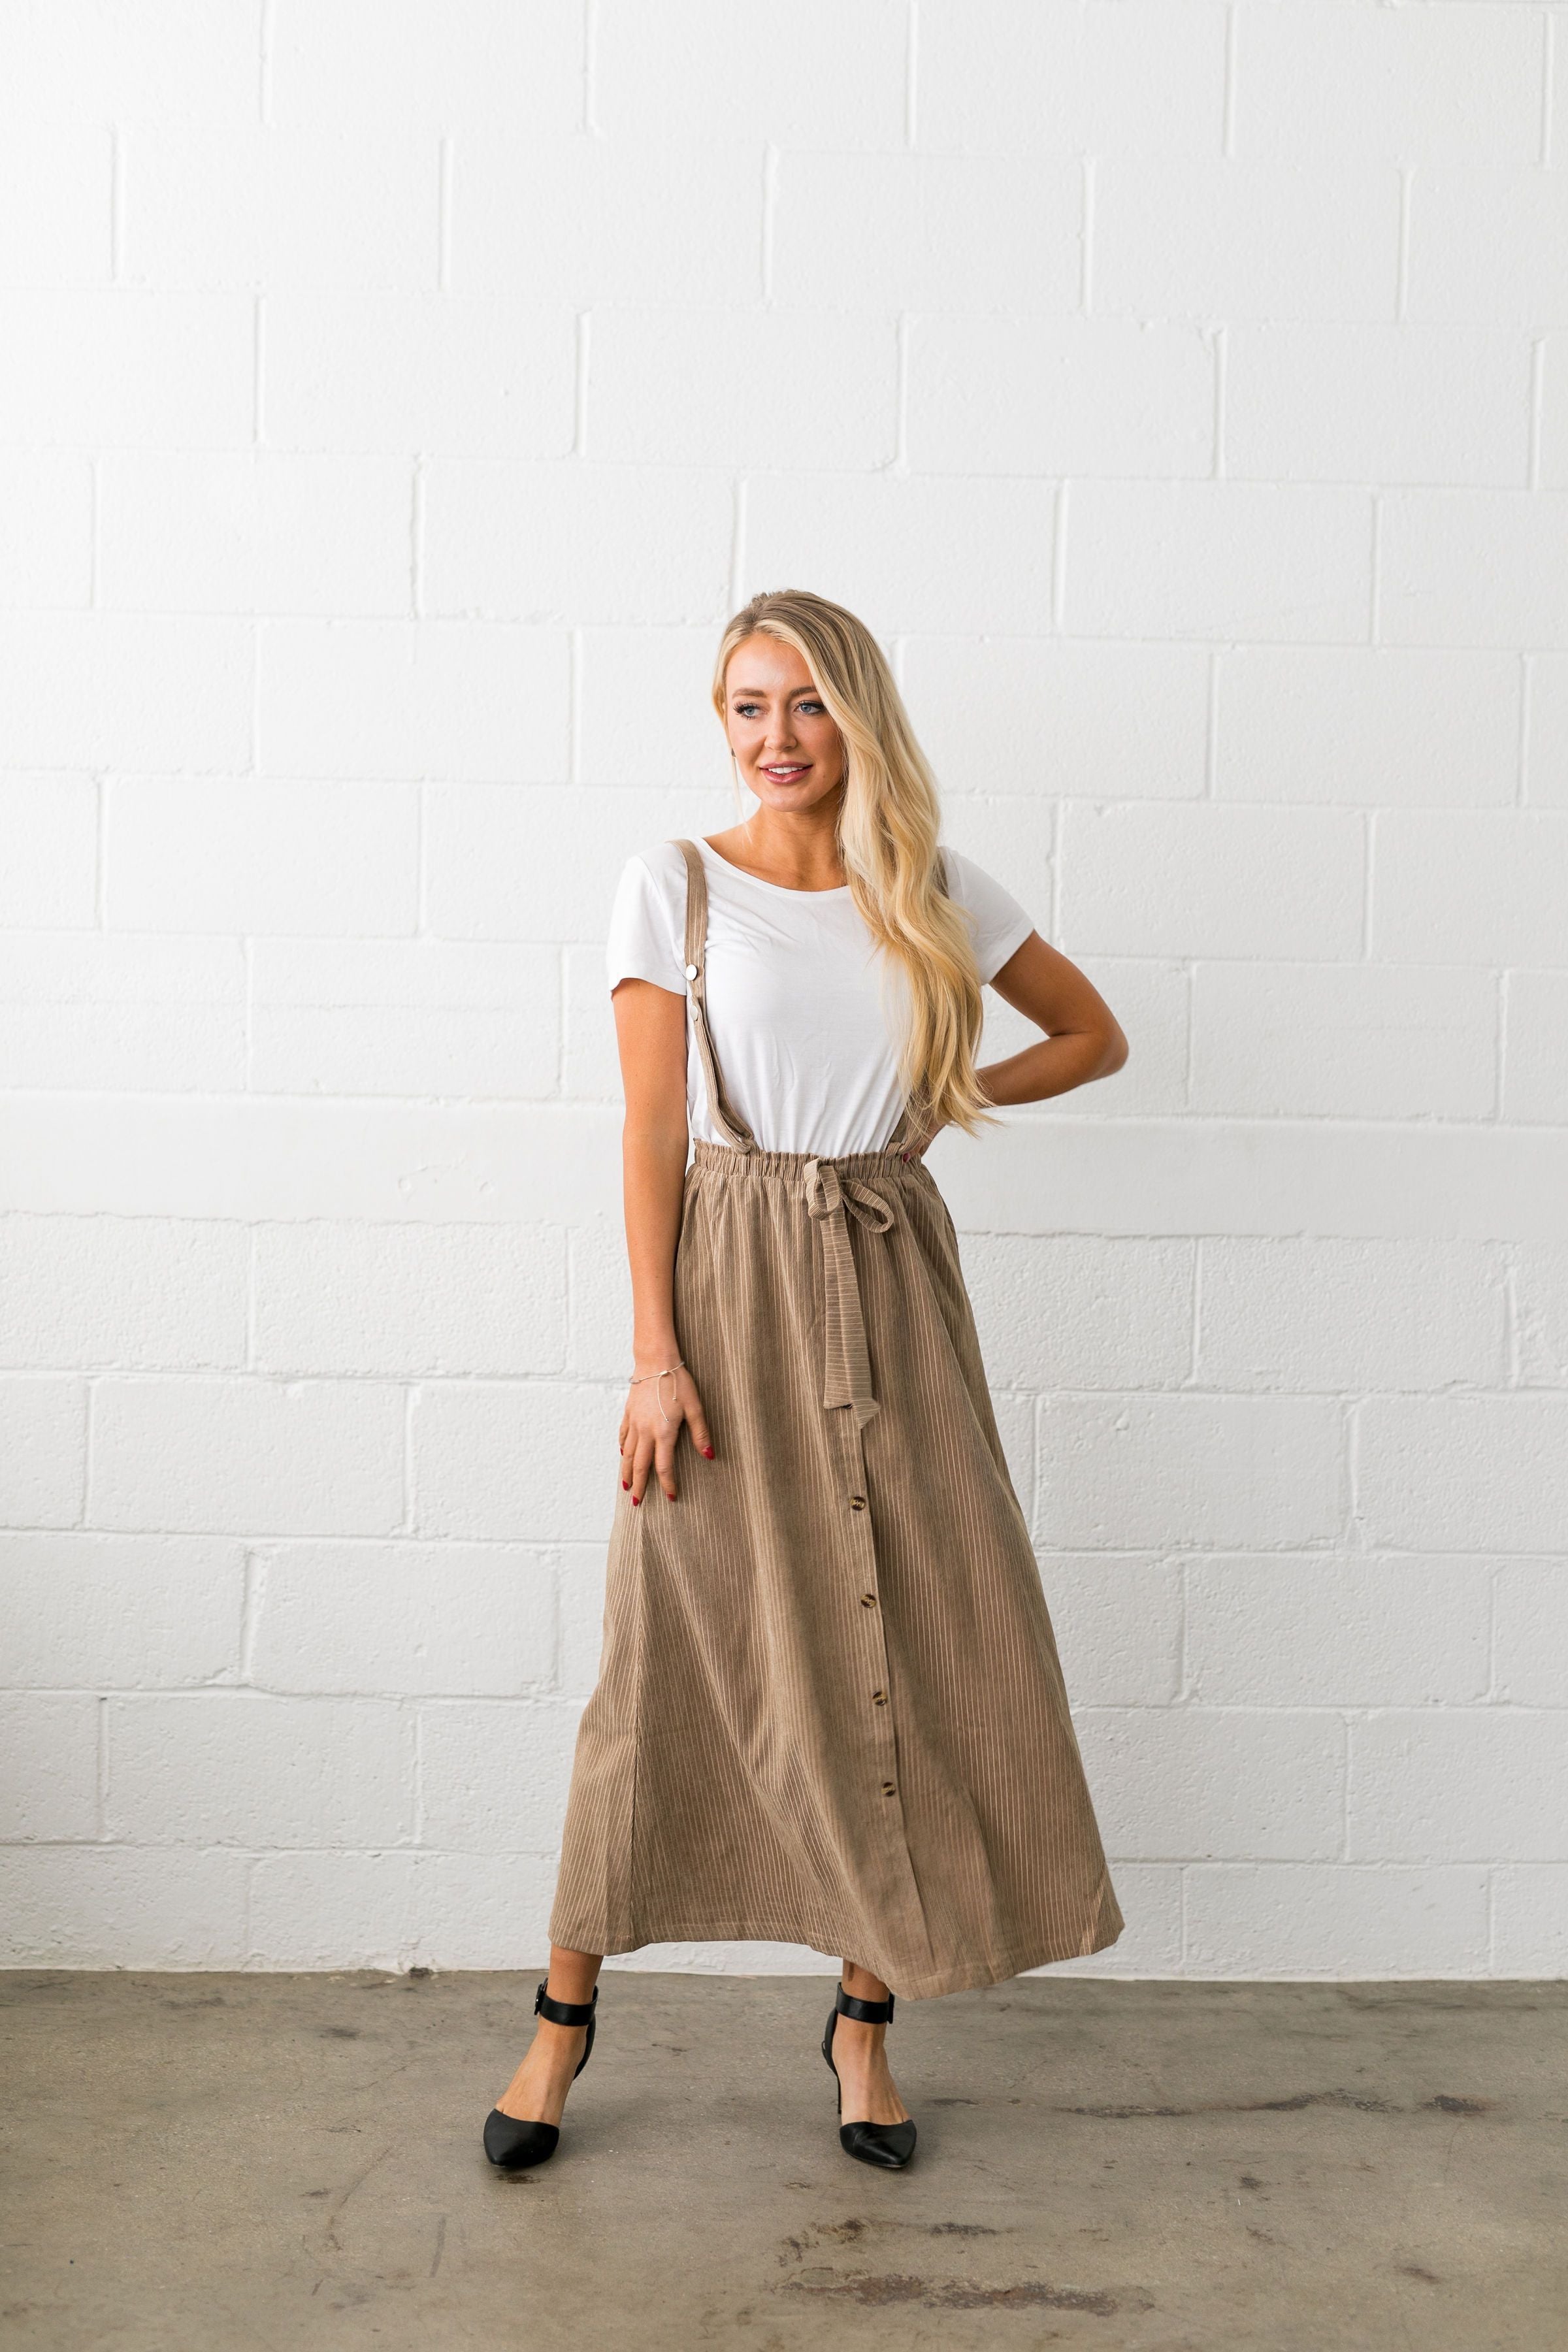 The Suspense Is Killing Me Skirt - ALL SALES FINAL